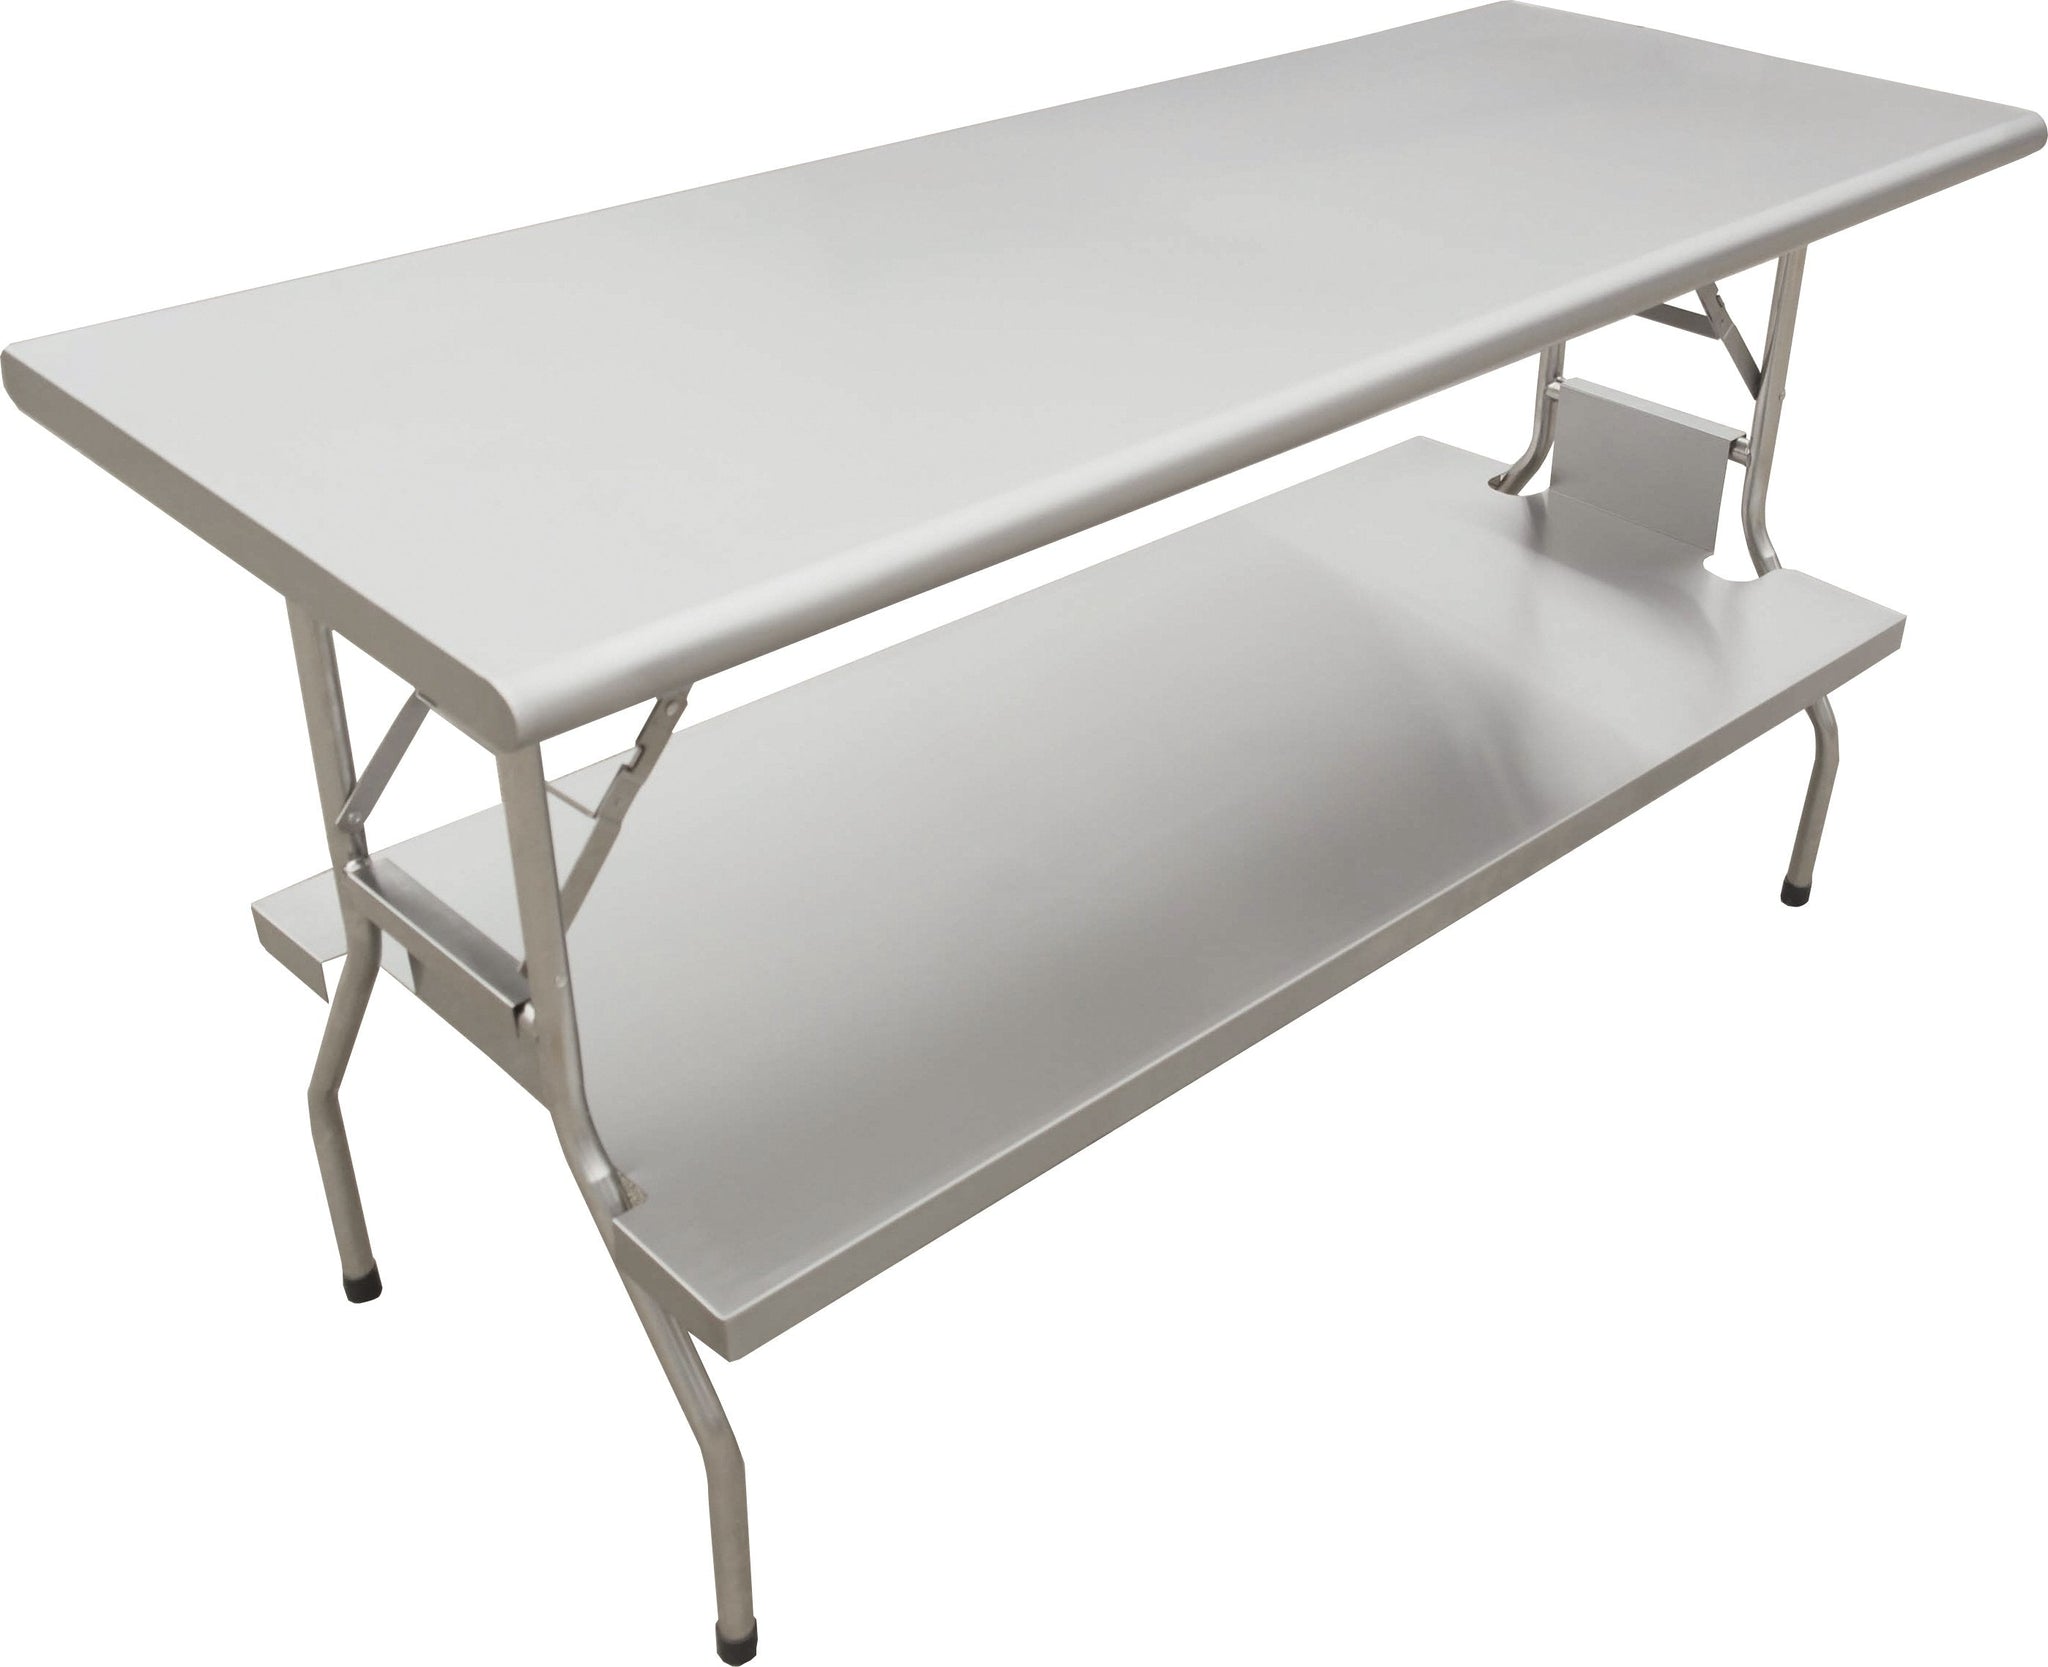 Omcan - 24” x 72” Stainless Steel Folding Table with Undershelf - 41235